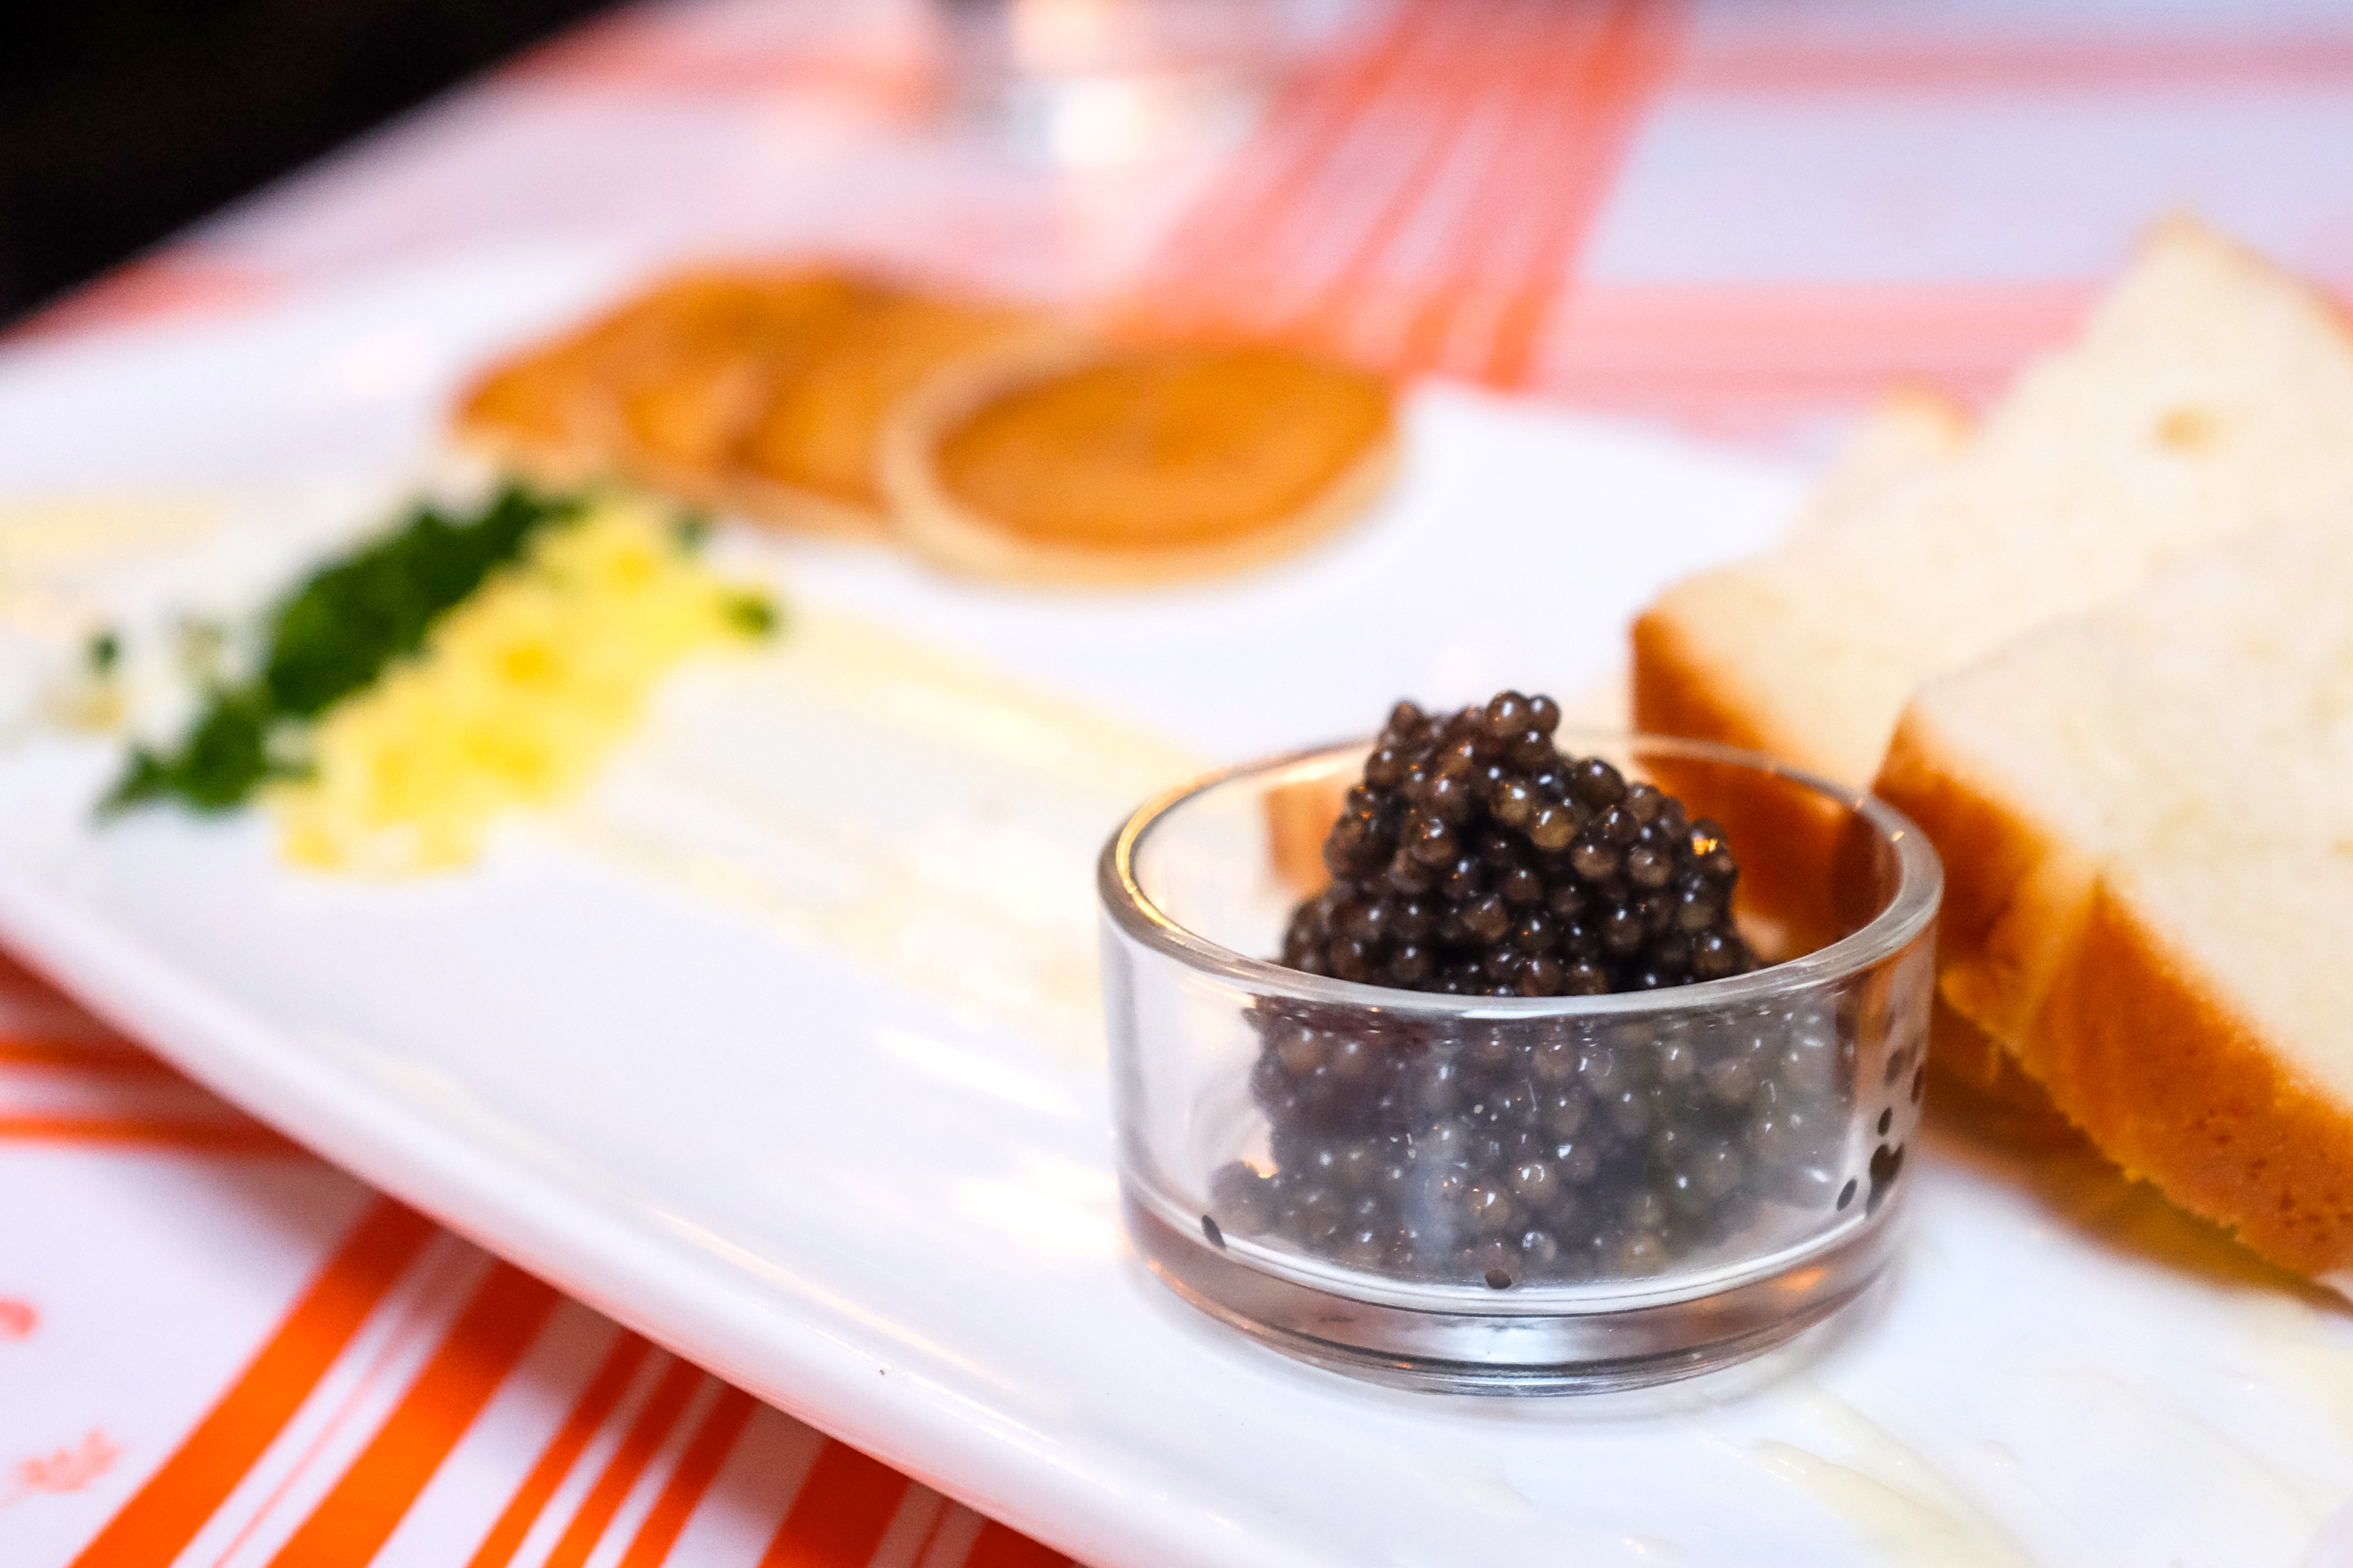 Caviar is one of the oldest feeds